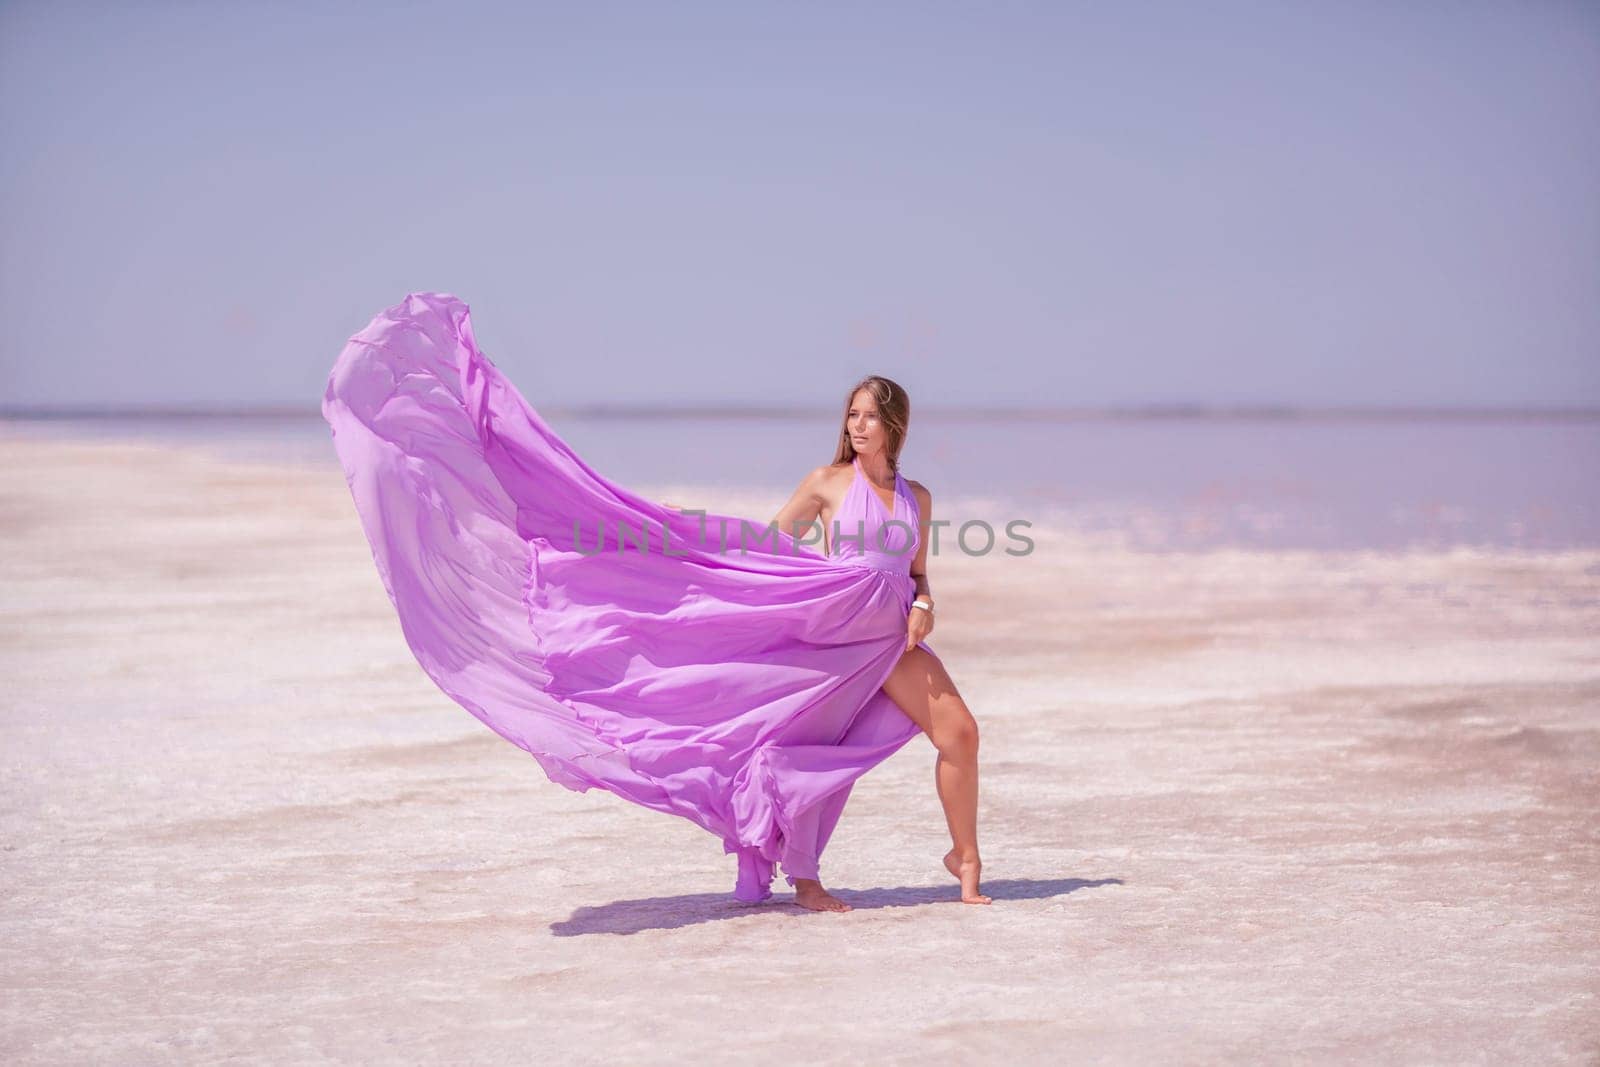 Woman in pink salt lake. She walks in a pink long dress and hat along the salty white shore of the lake. Wanderlust photo for memory.